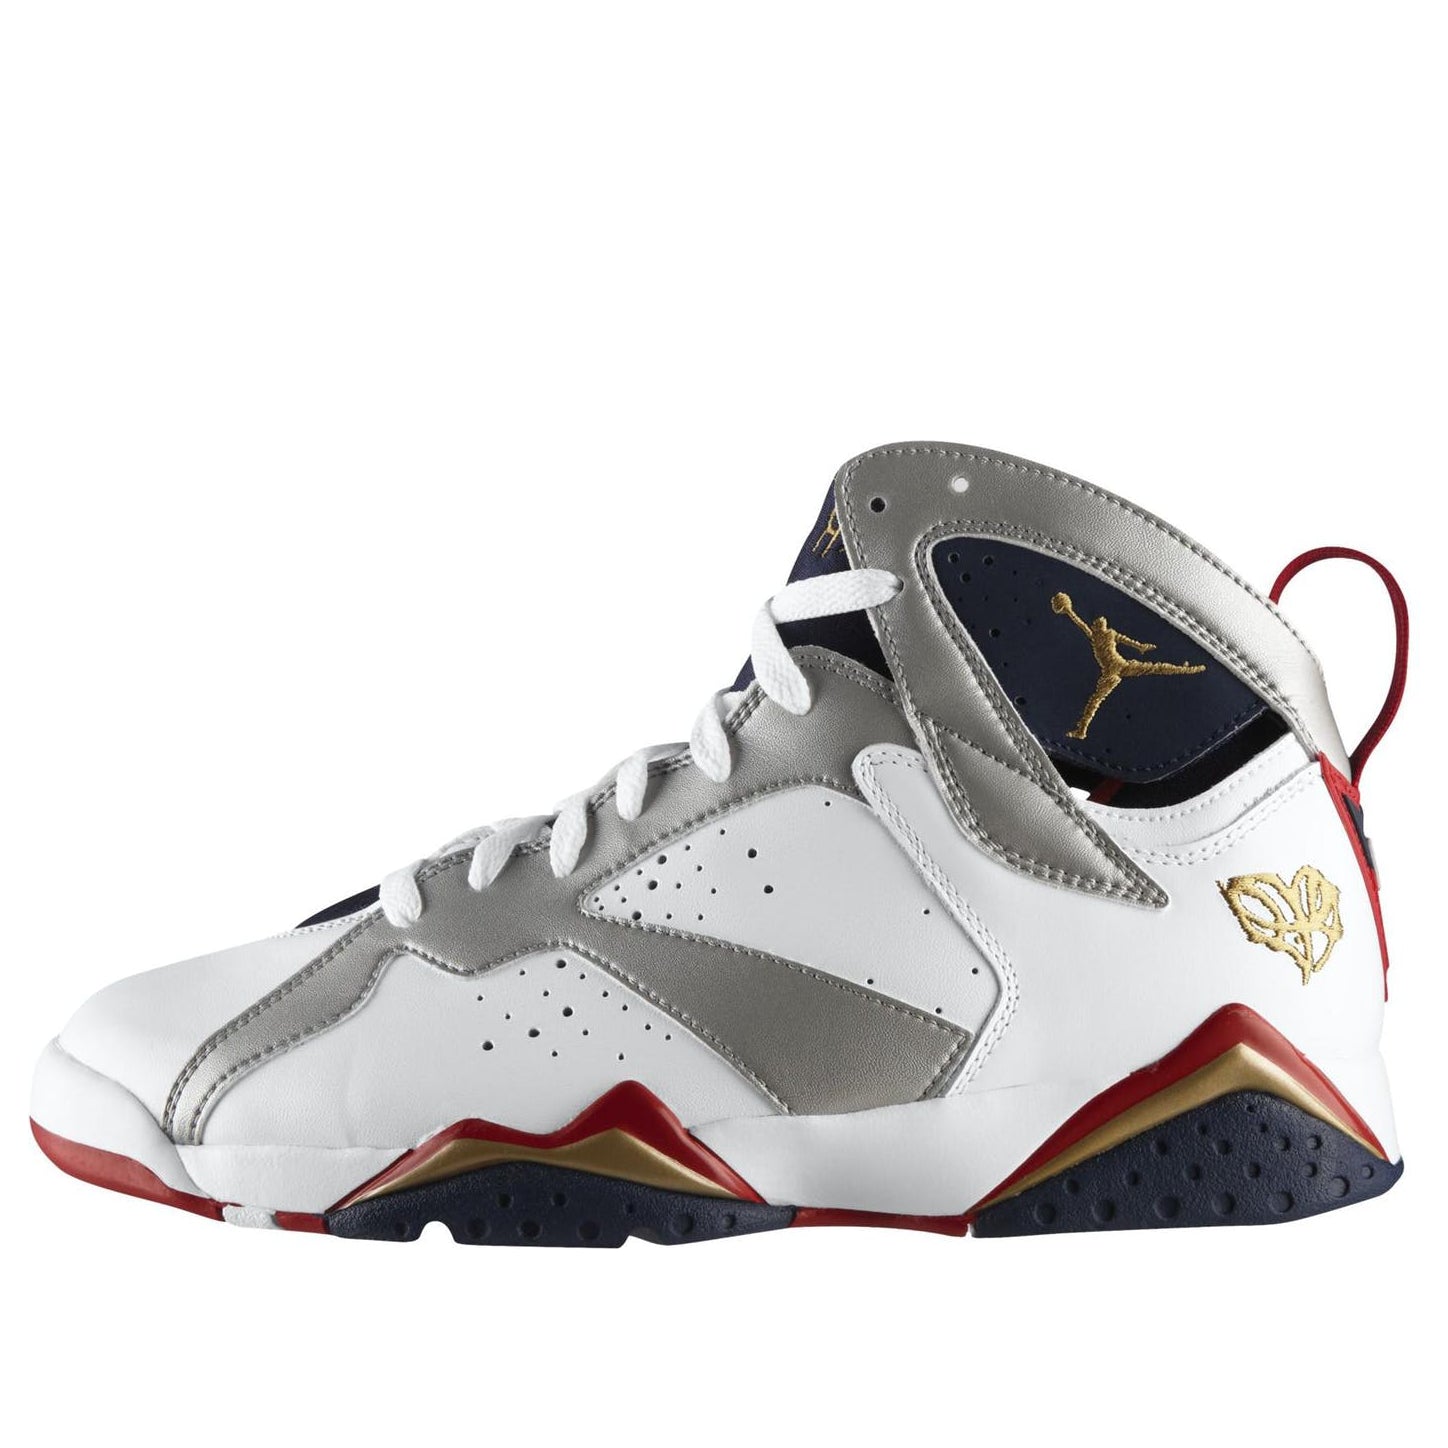 Air Jordan 7 Retro 'For The Love Of The Game' White/Mtllc Gold-Tr Rd-Mid Nvy 304775-103